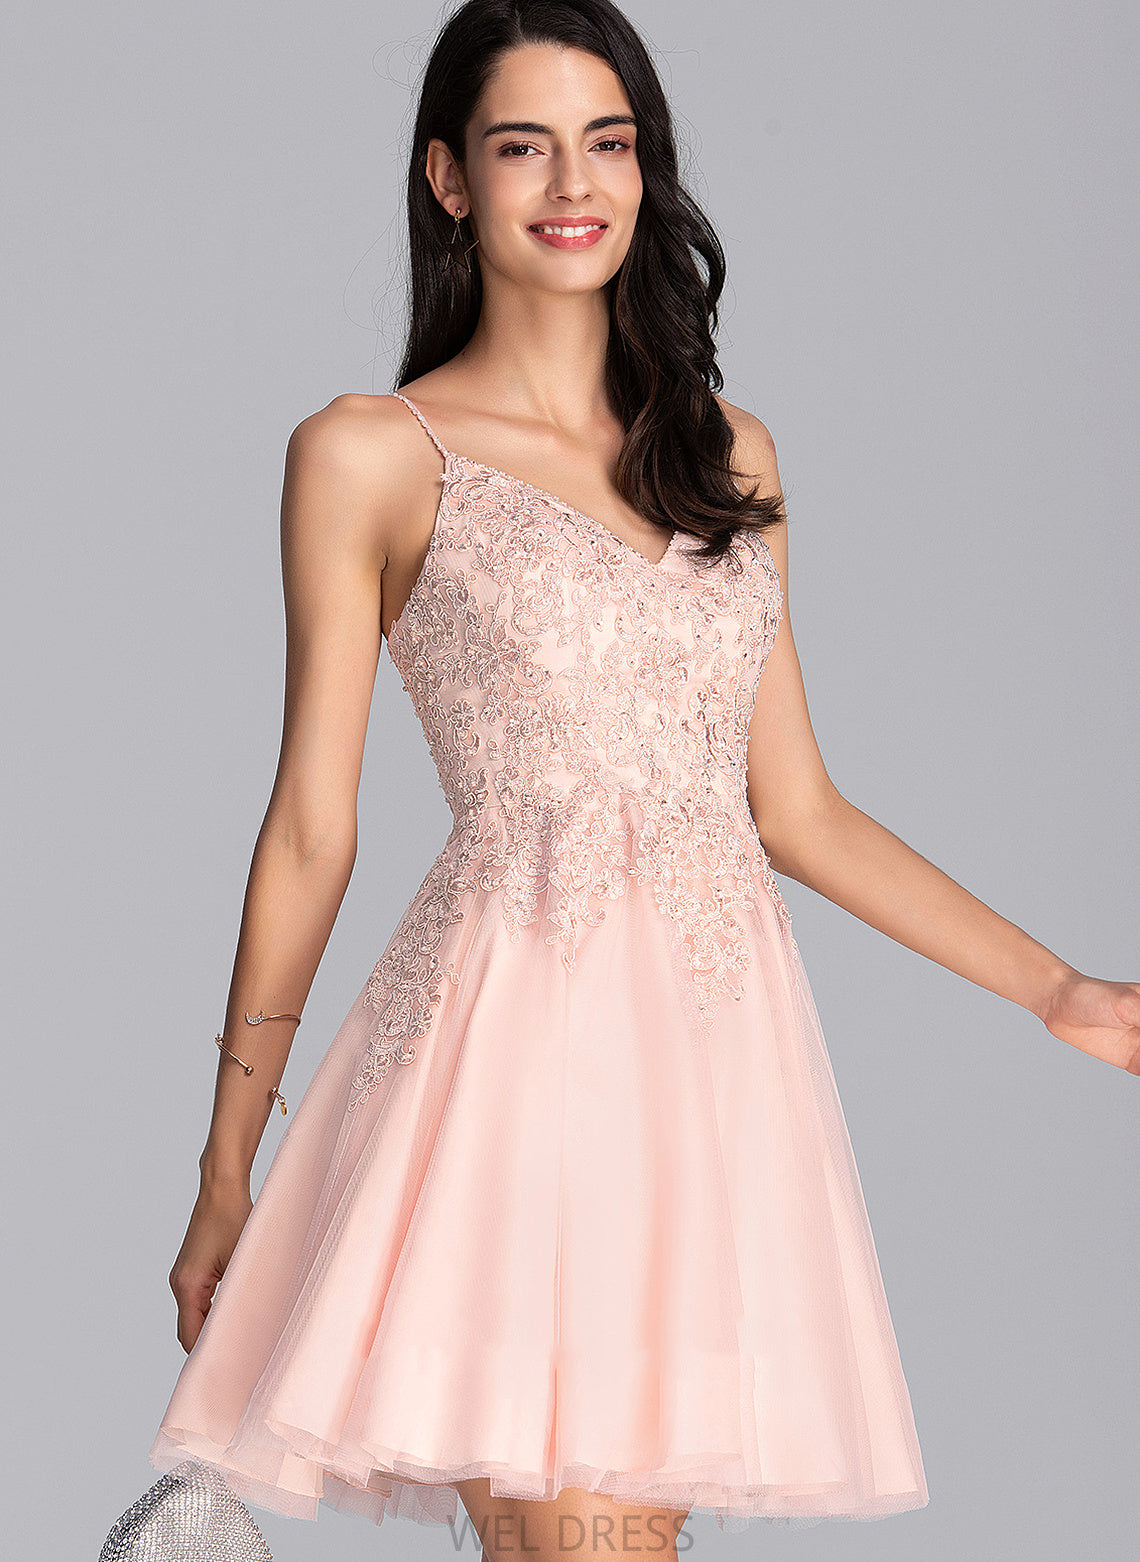 Homecoming Homecoming Dresses With Lace A-Line Short/Mini Dress Beading Toni Tulle V-neck